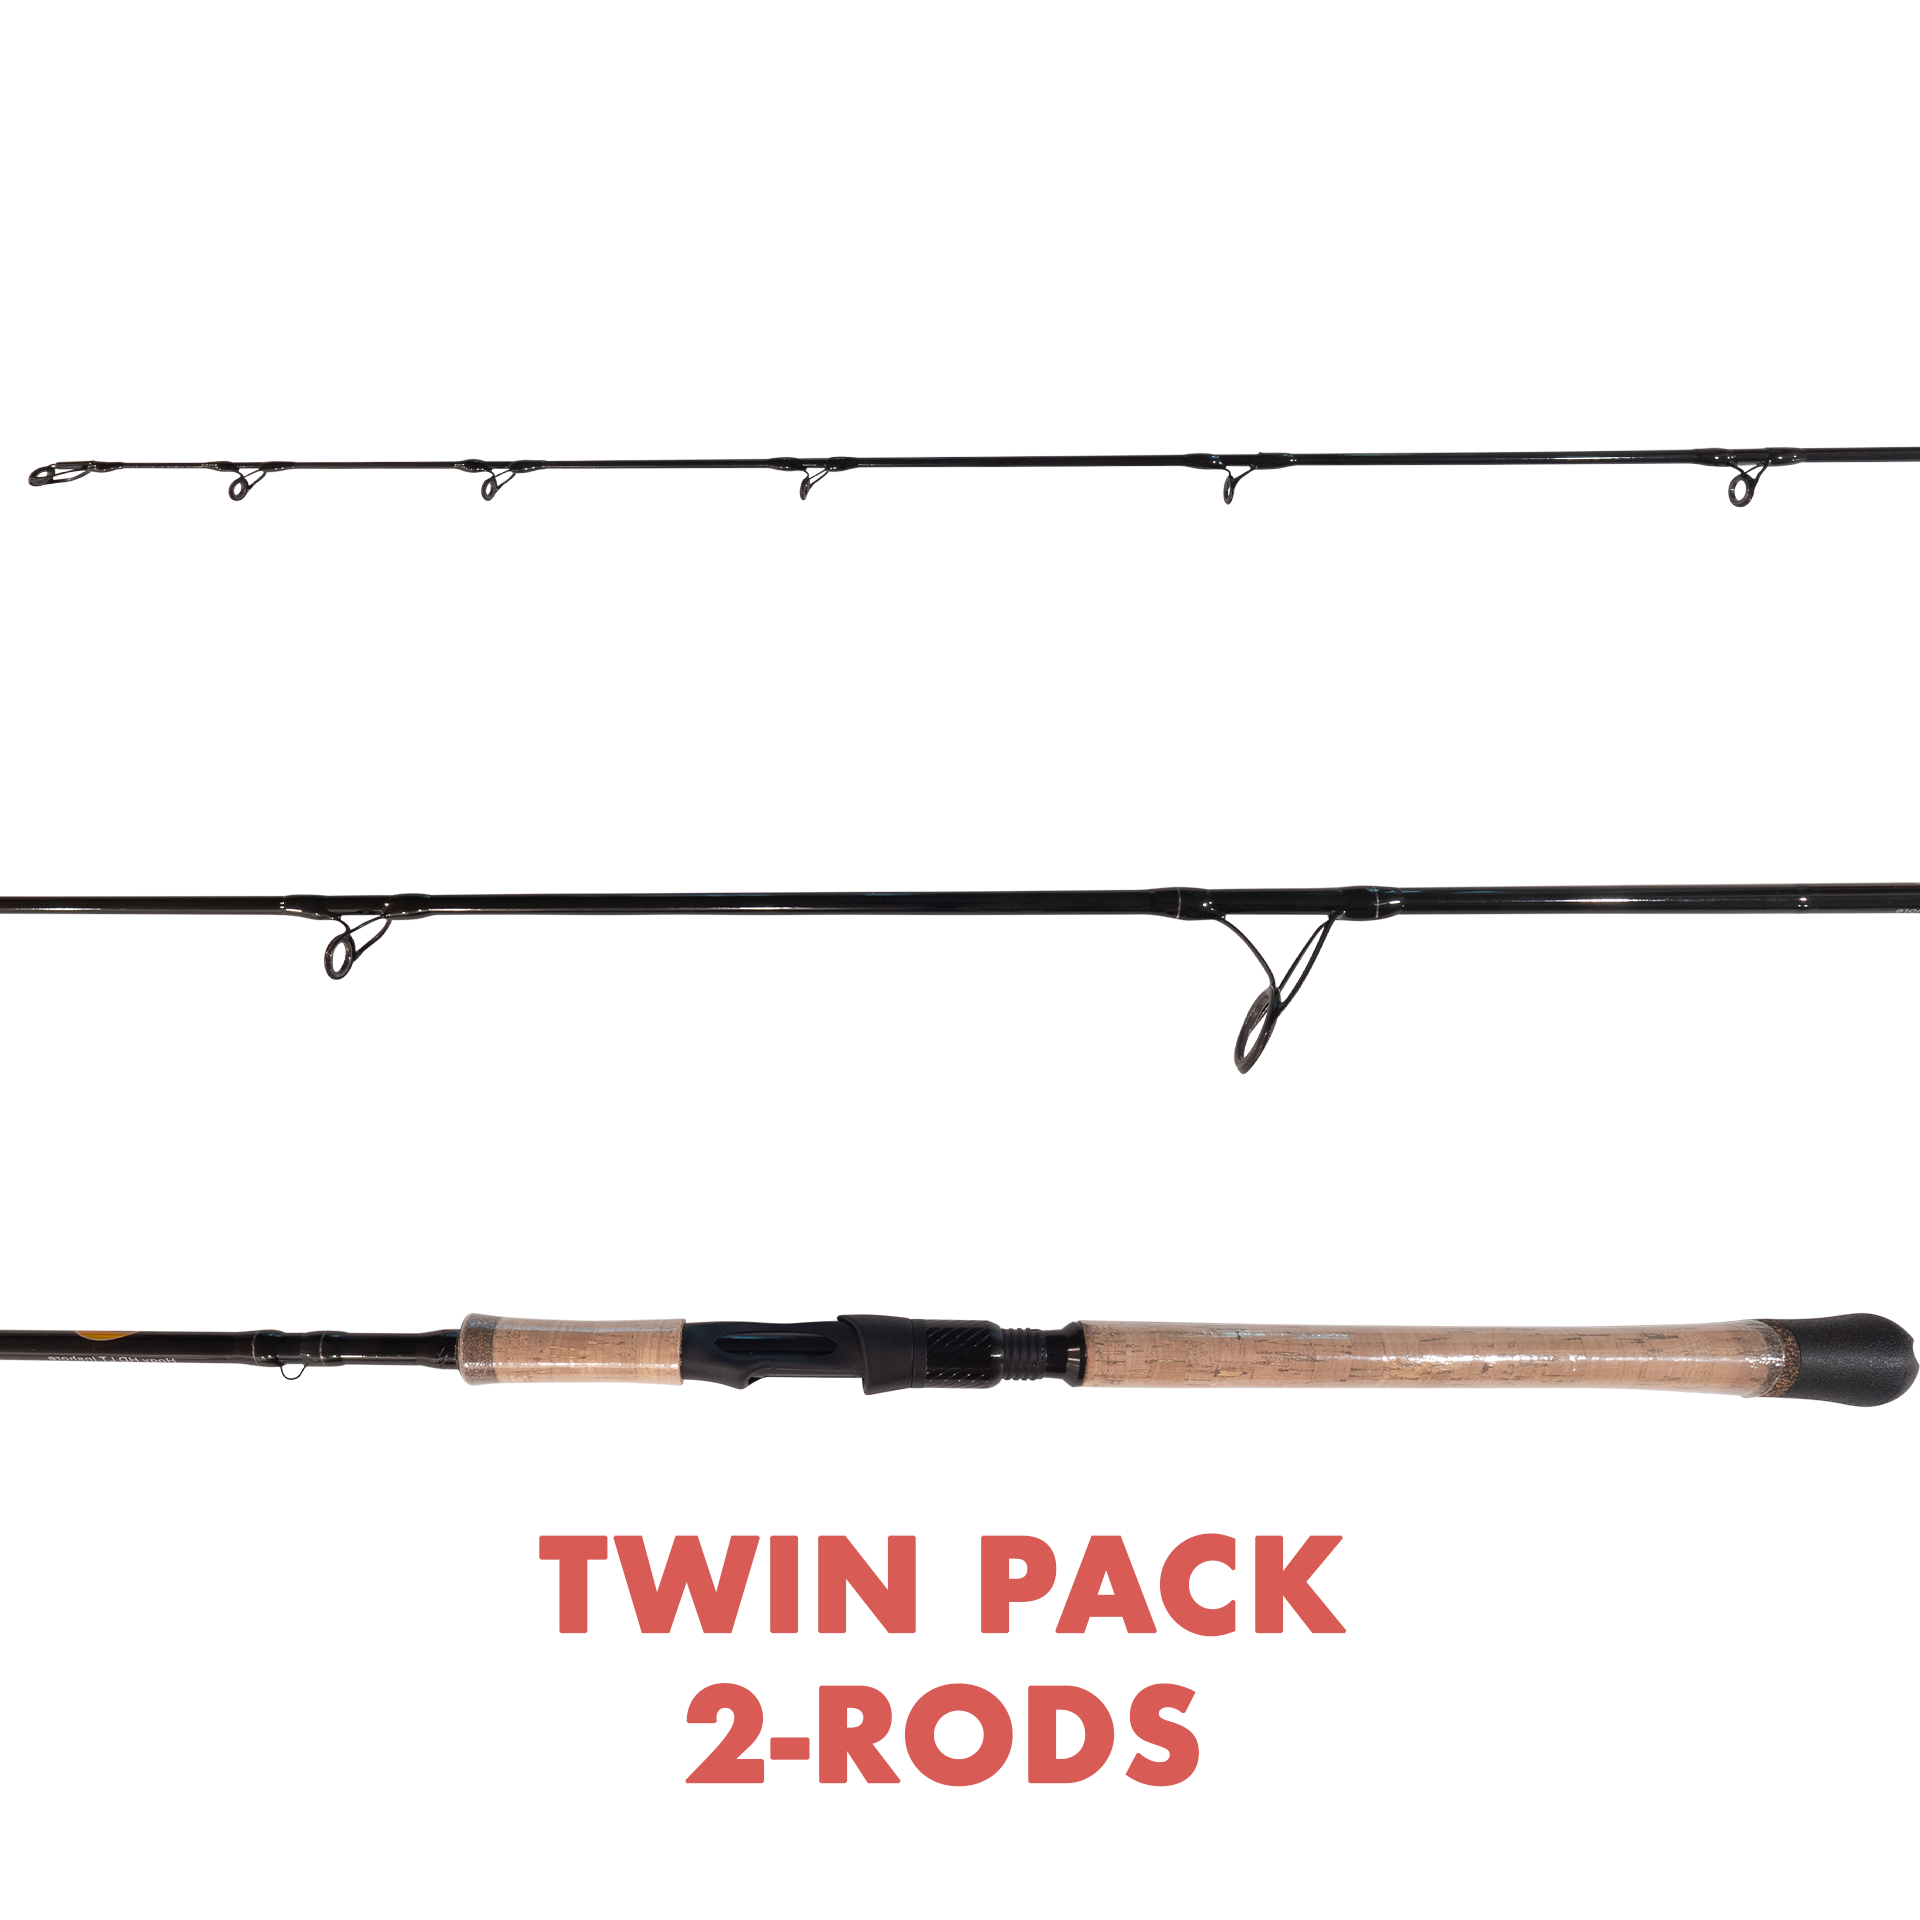 TWIN PACK Inshore Spinning Rod: Mod-Fast Action 7' MH (3/4oz - 2oz)